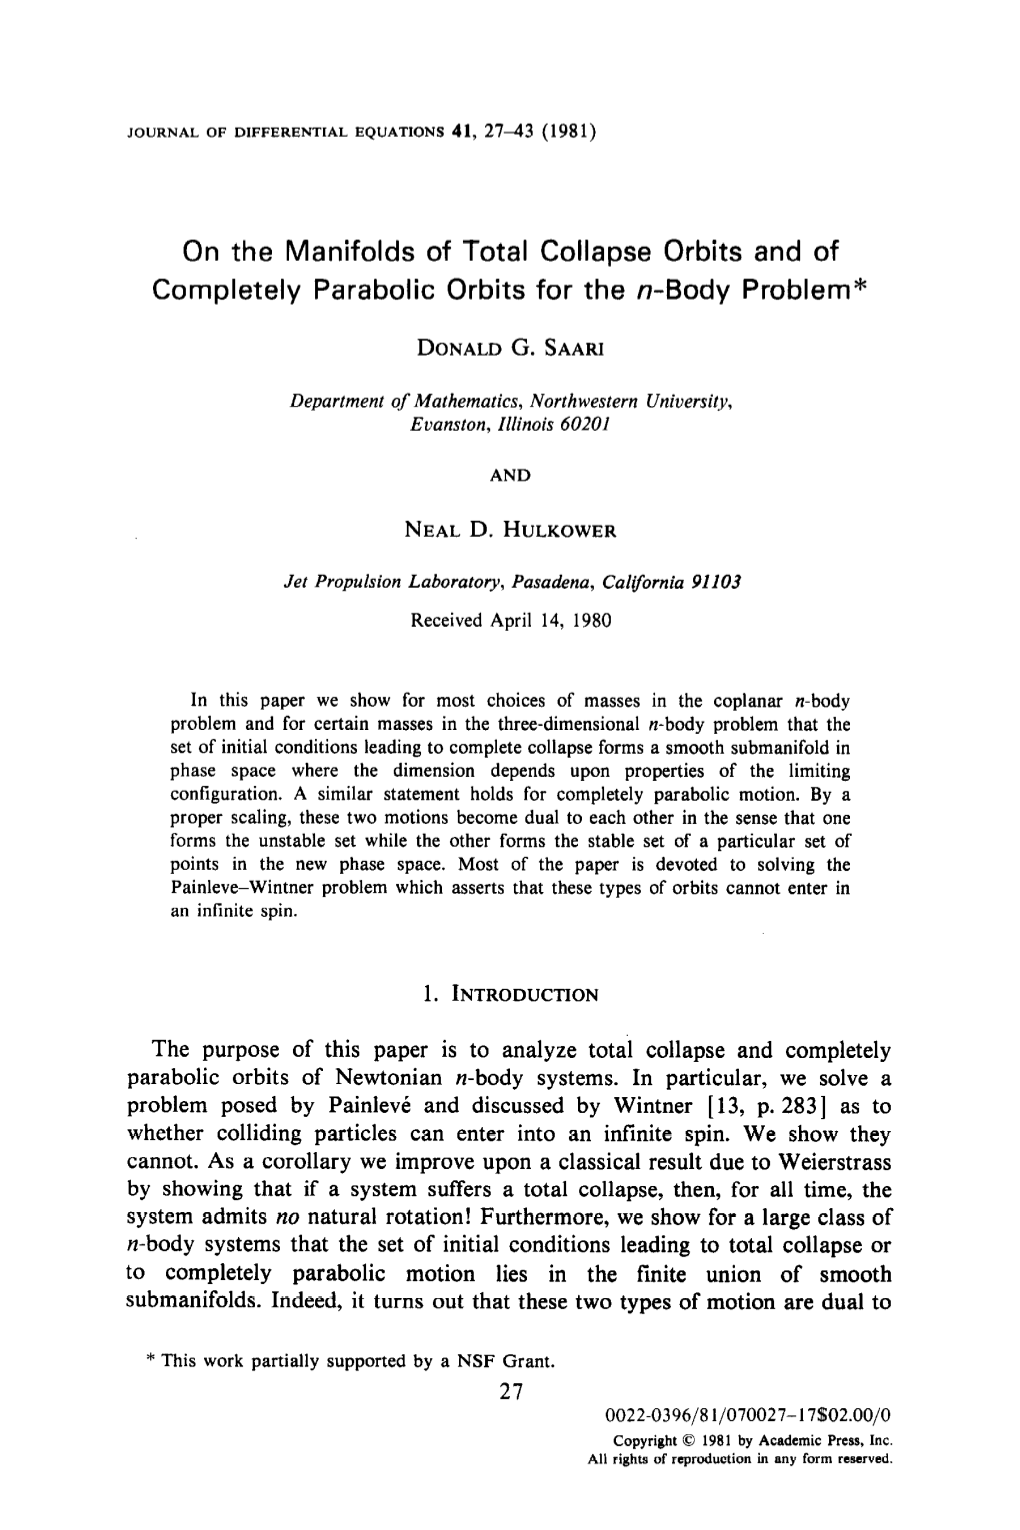 On the Manifolds of Total Collapse Orbits and of Completely Parabolic Orbits for the N-Body Problem*